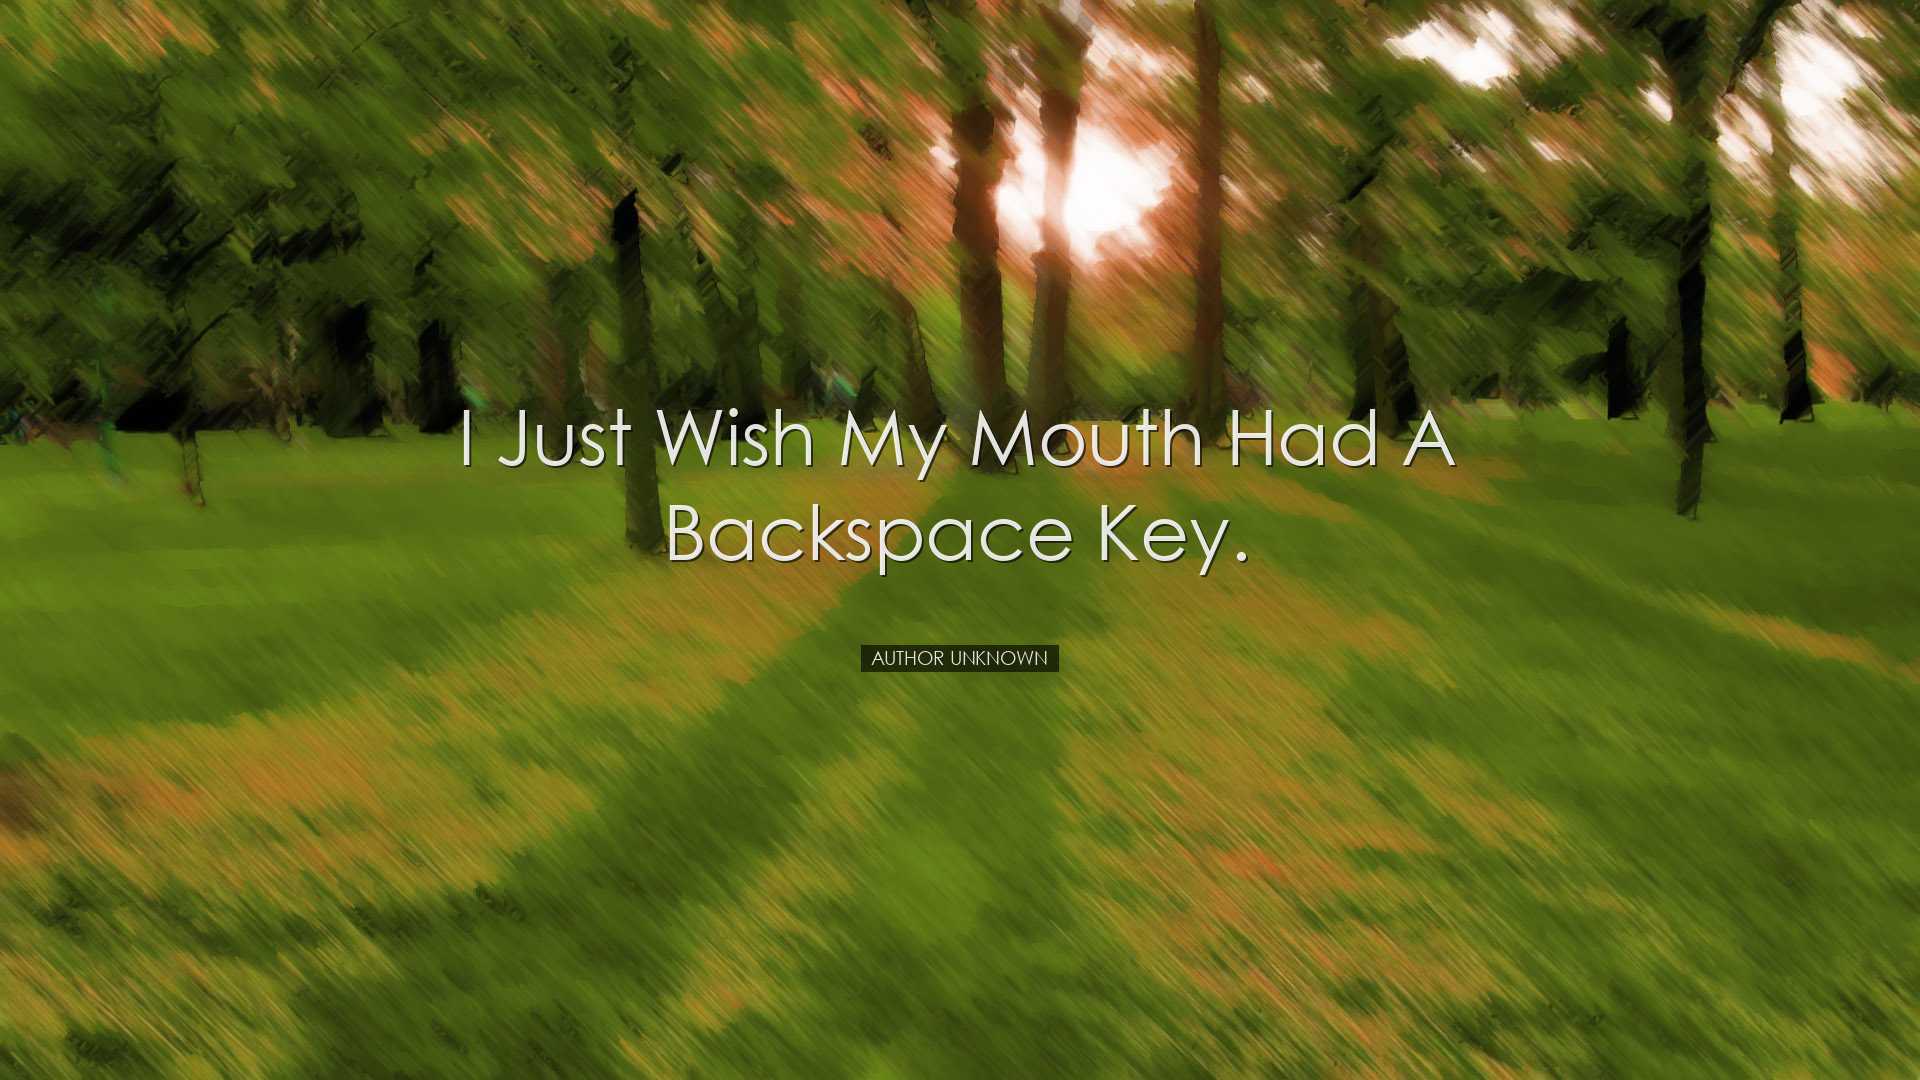 I just wish my mouth had a backspace key. - Author Unknown